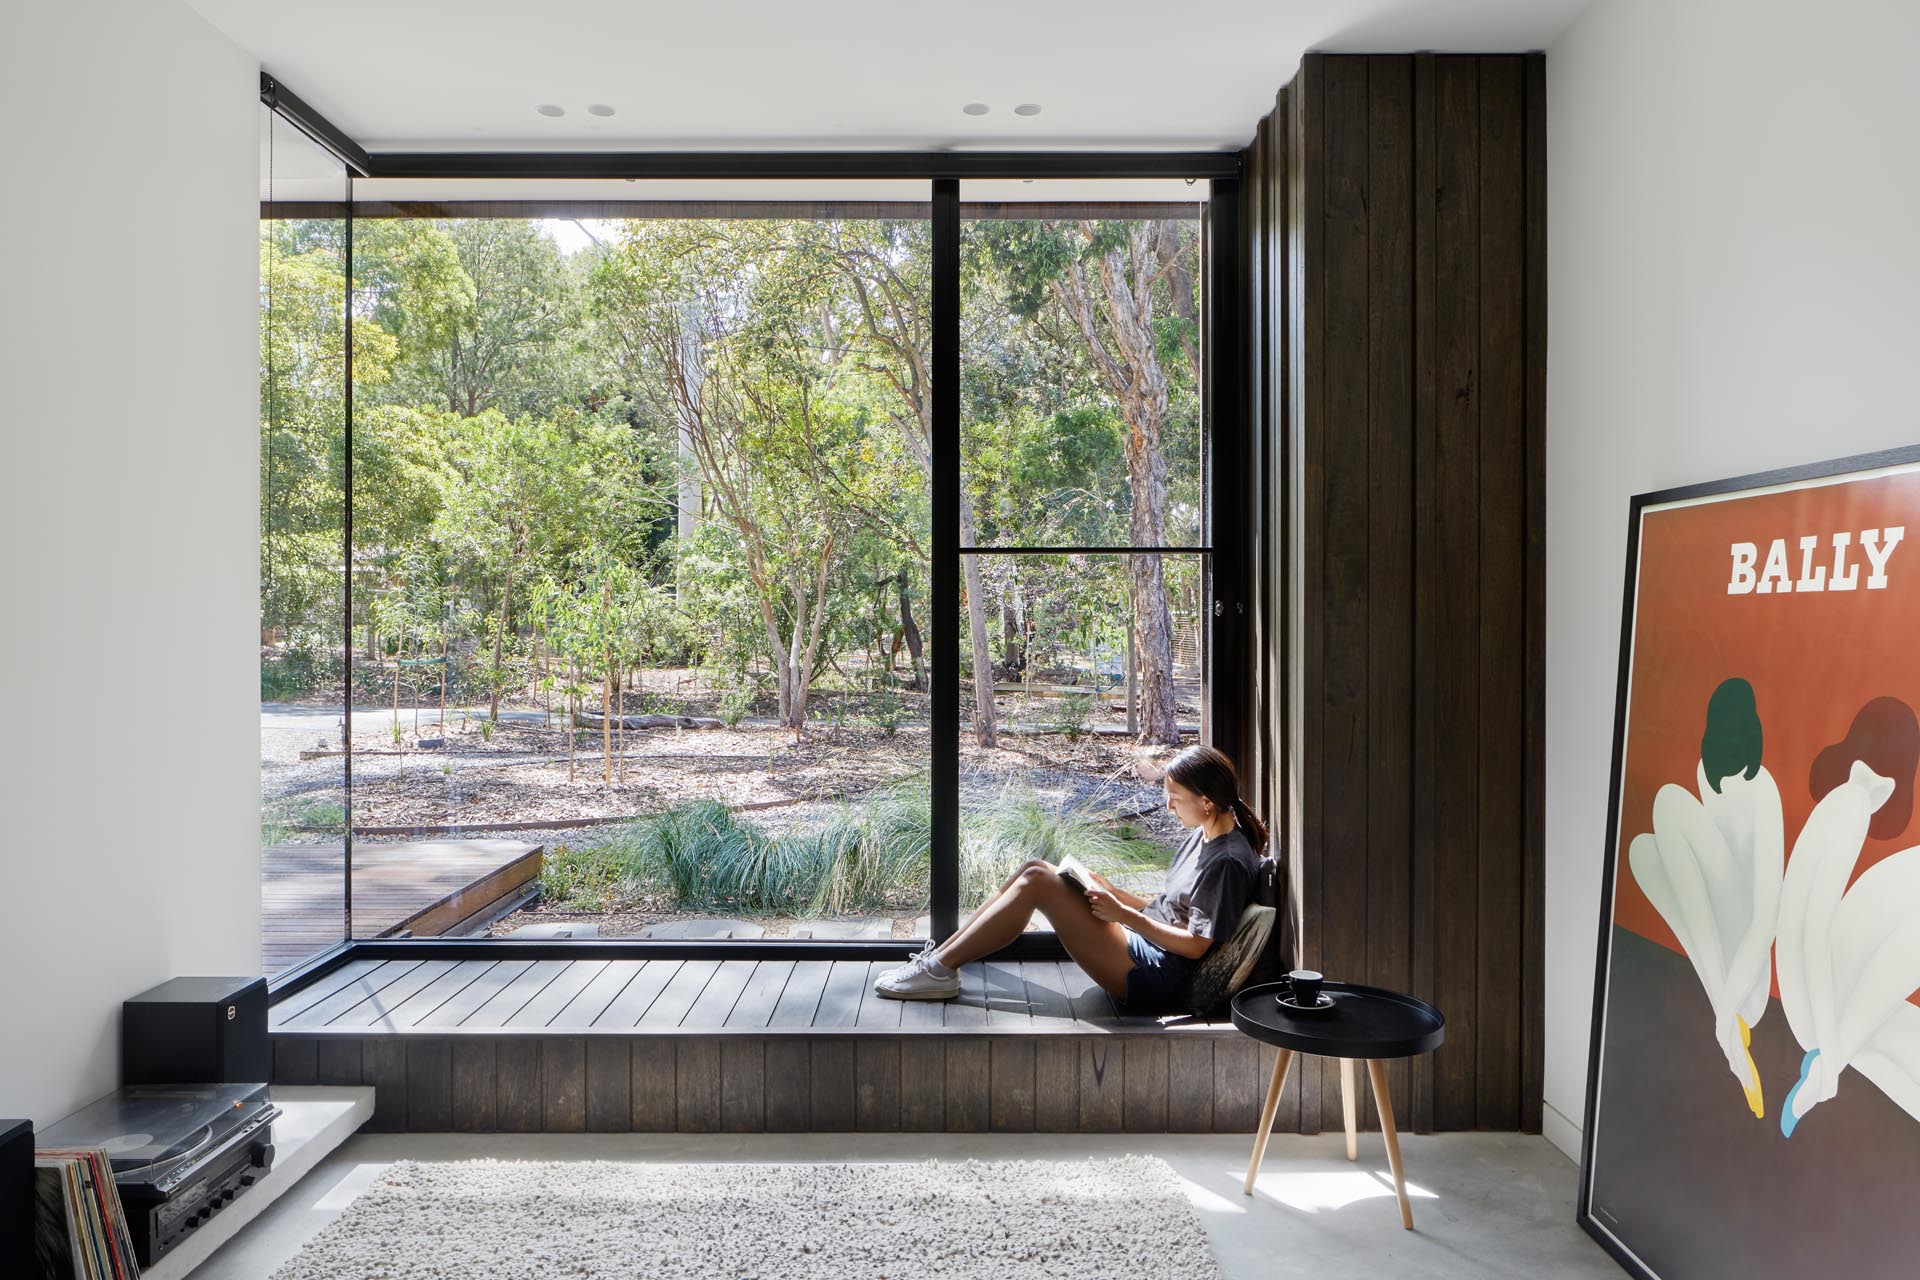 A large wood bench that looks out to the front garden through the floor-to-ceiling corner window.